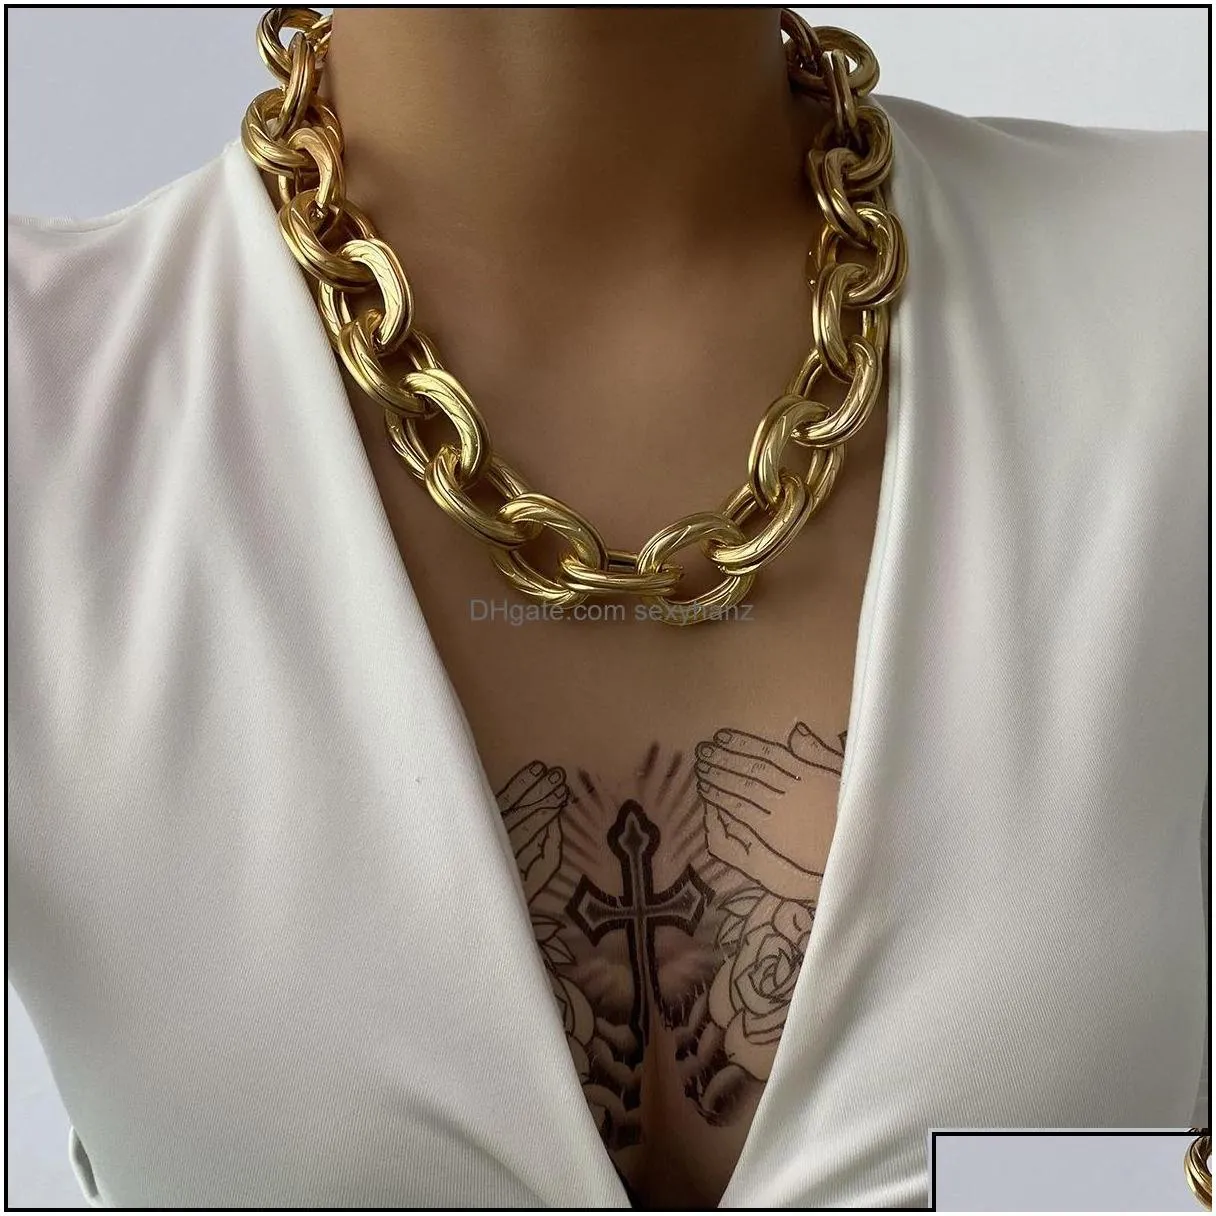 pendant pendants jewelry wide neck hiphop rock b metallic necklace golden women exaggerated chain necklaces girls fashion gothic jewelry